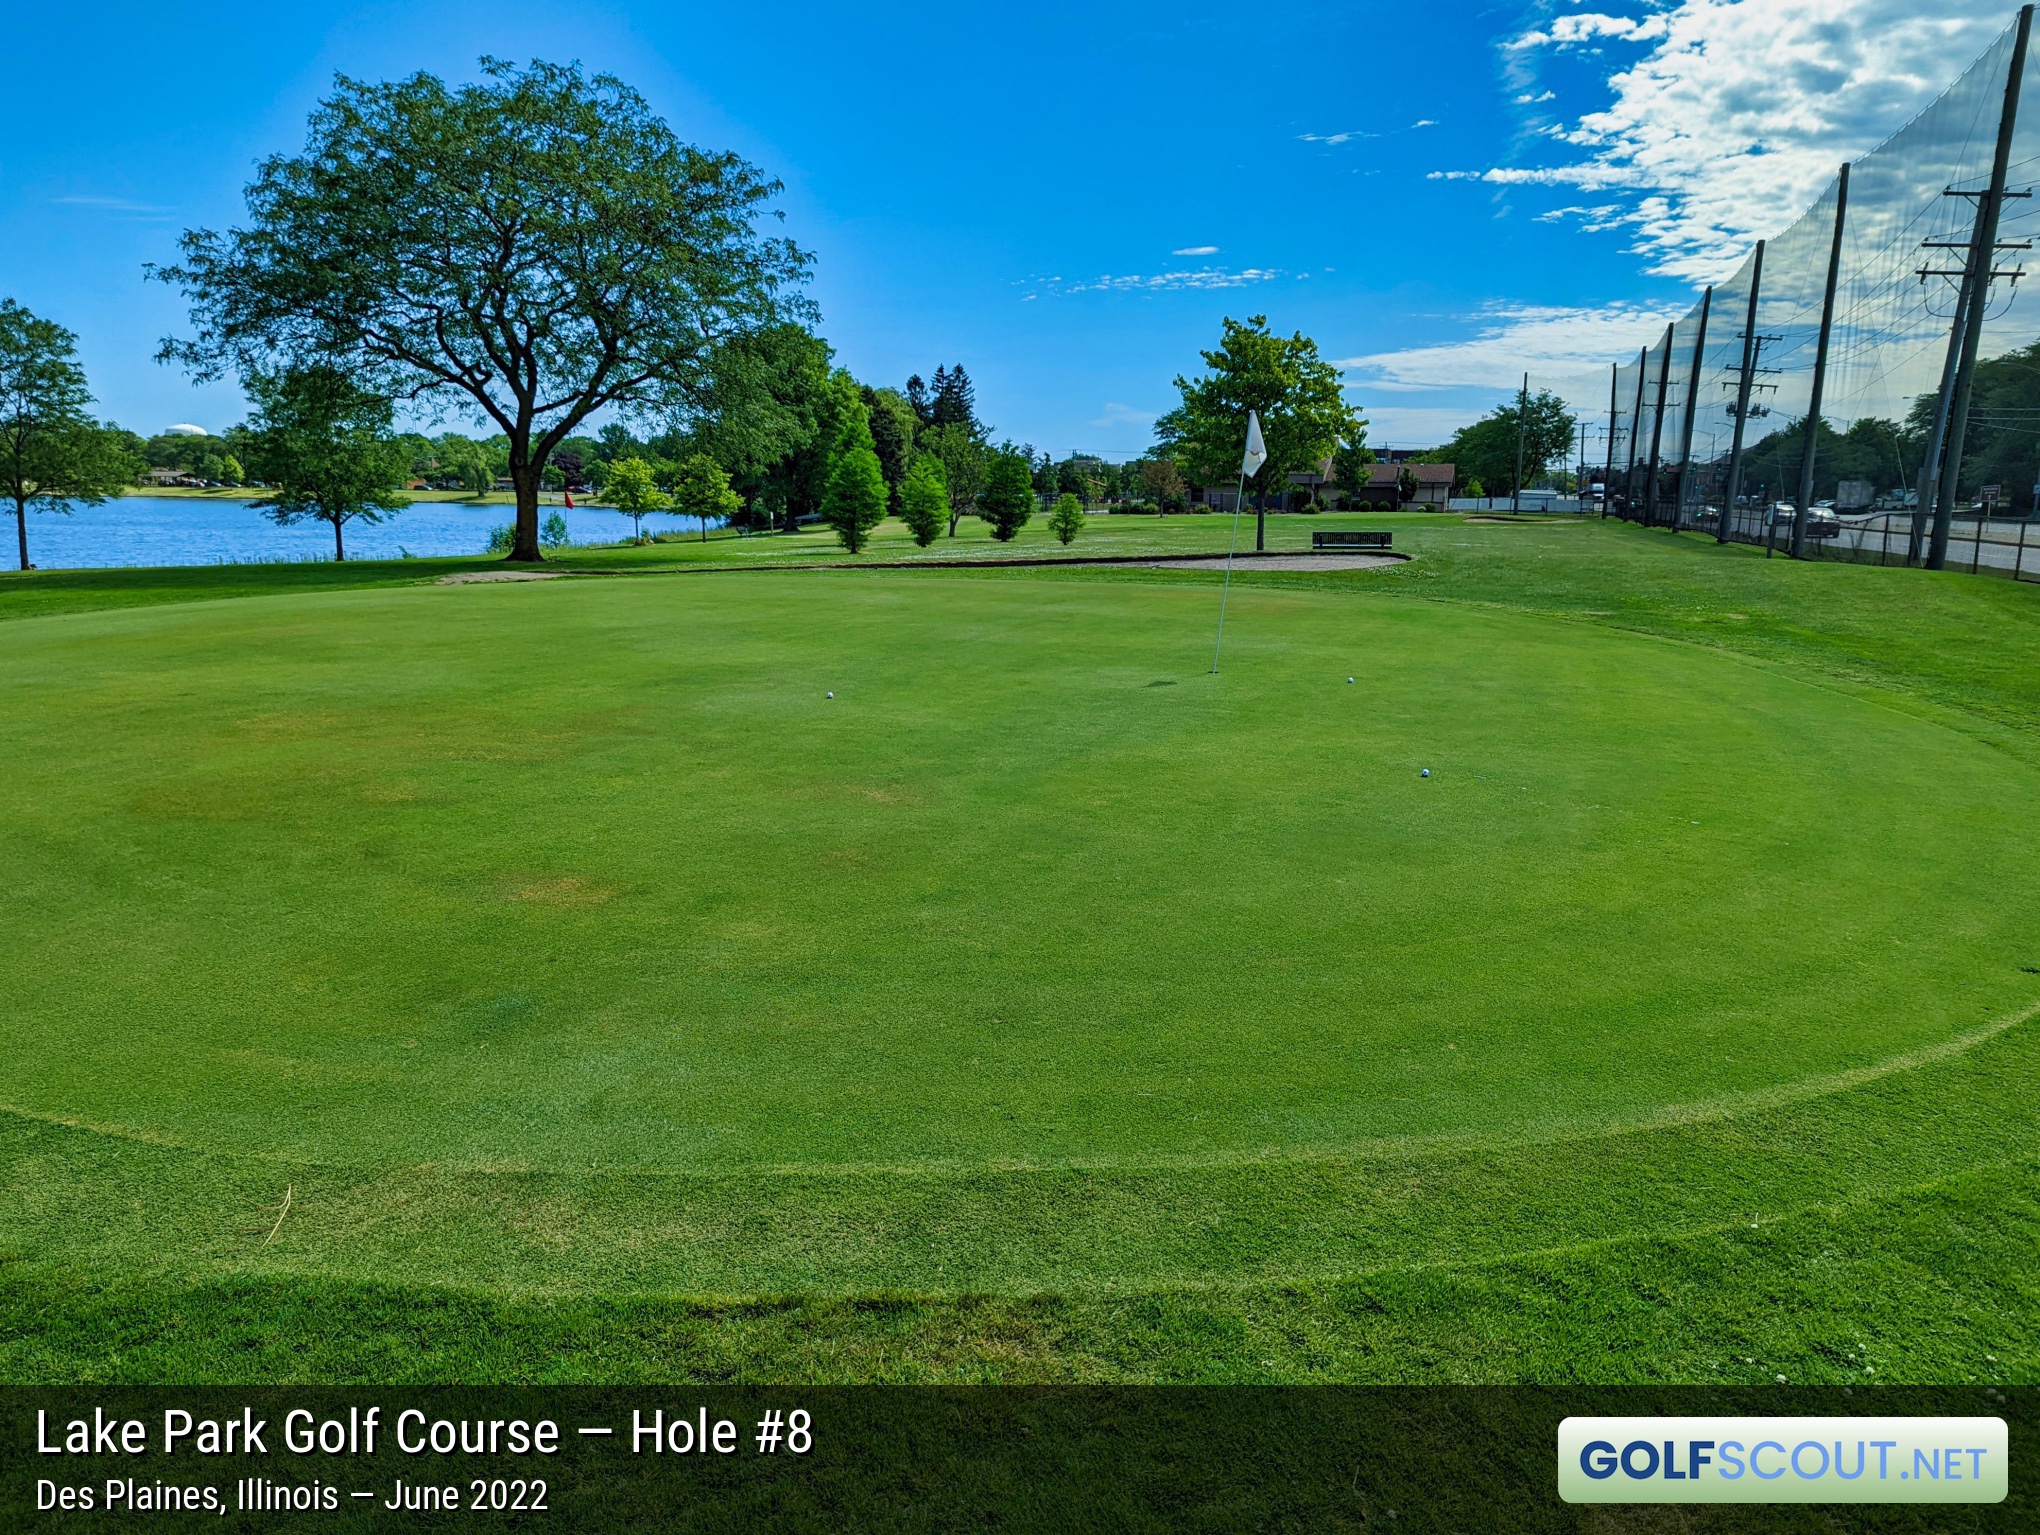 Photo of hole #8 at Lake Park Golf Course in Des Plaines, Illinois. 